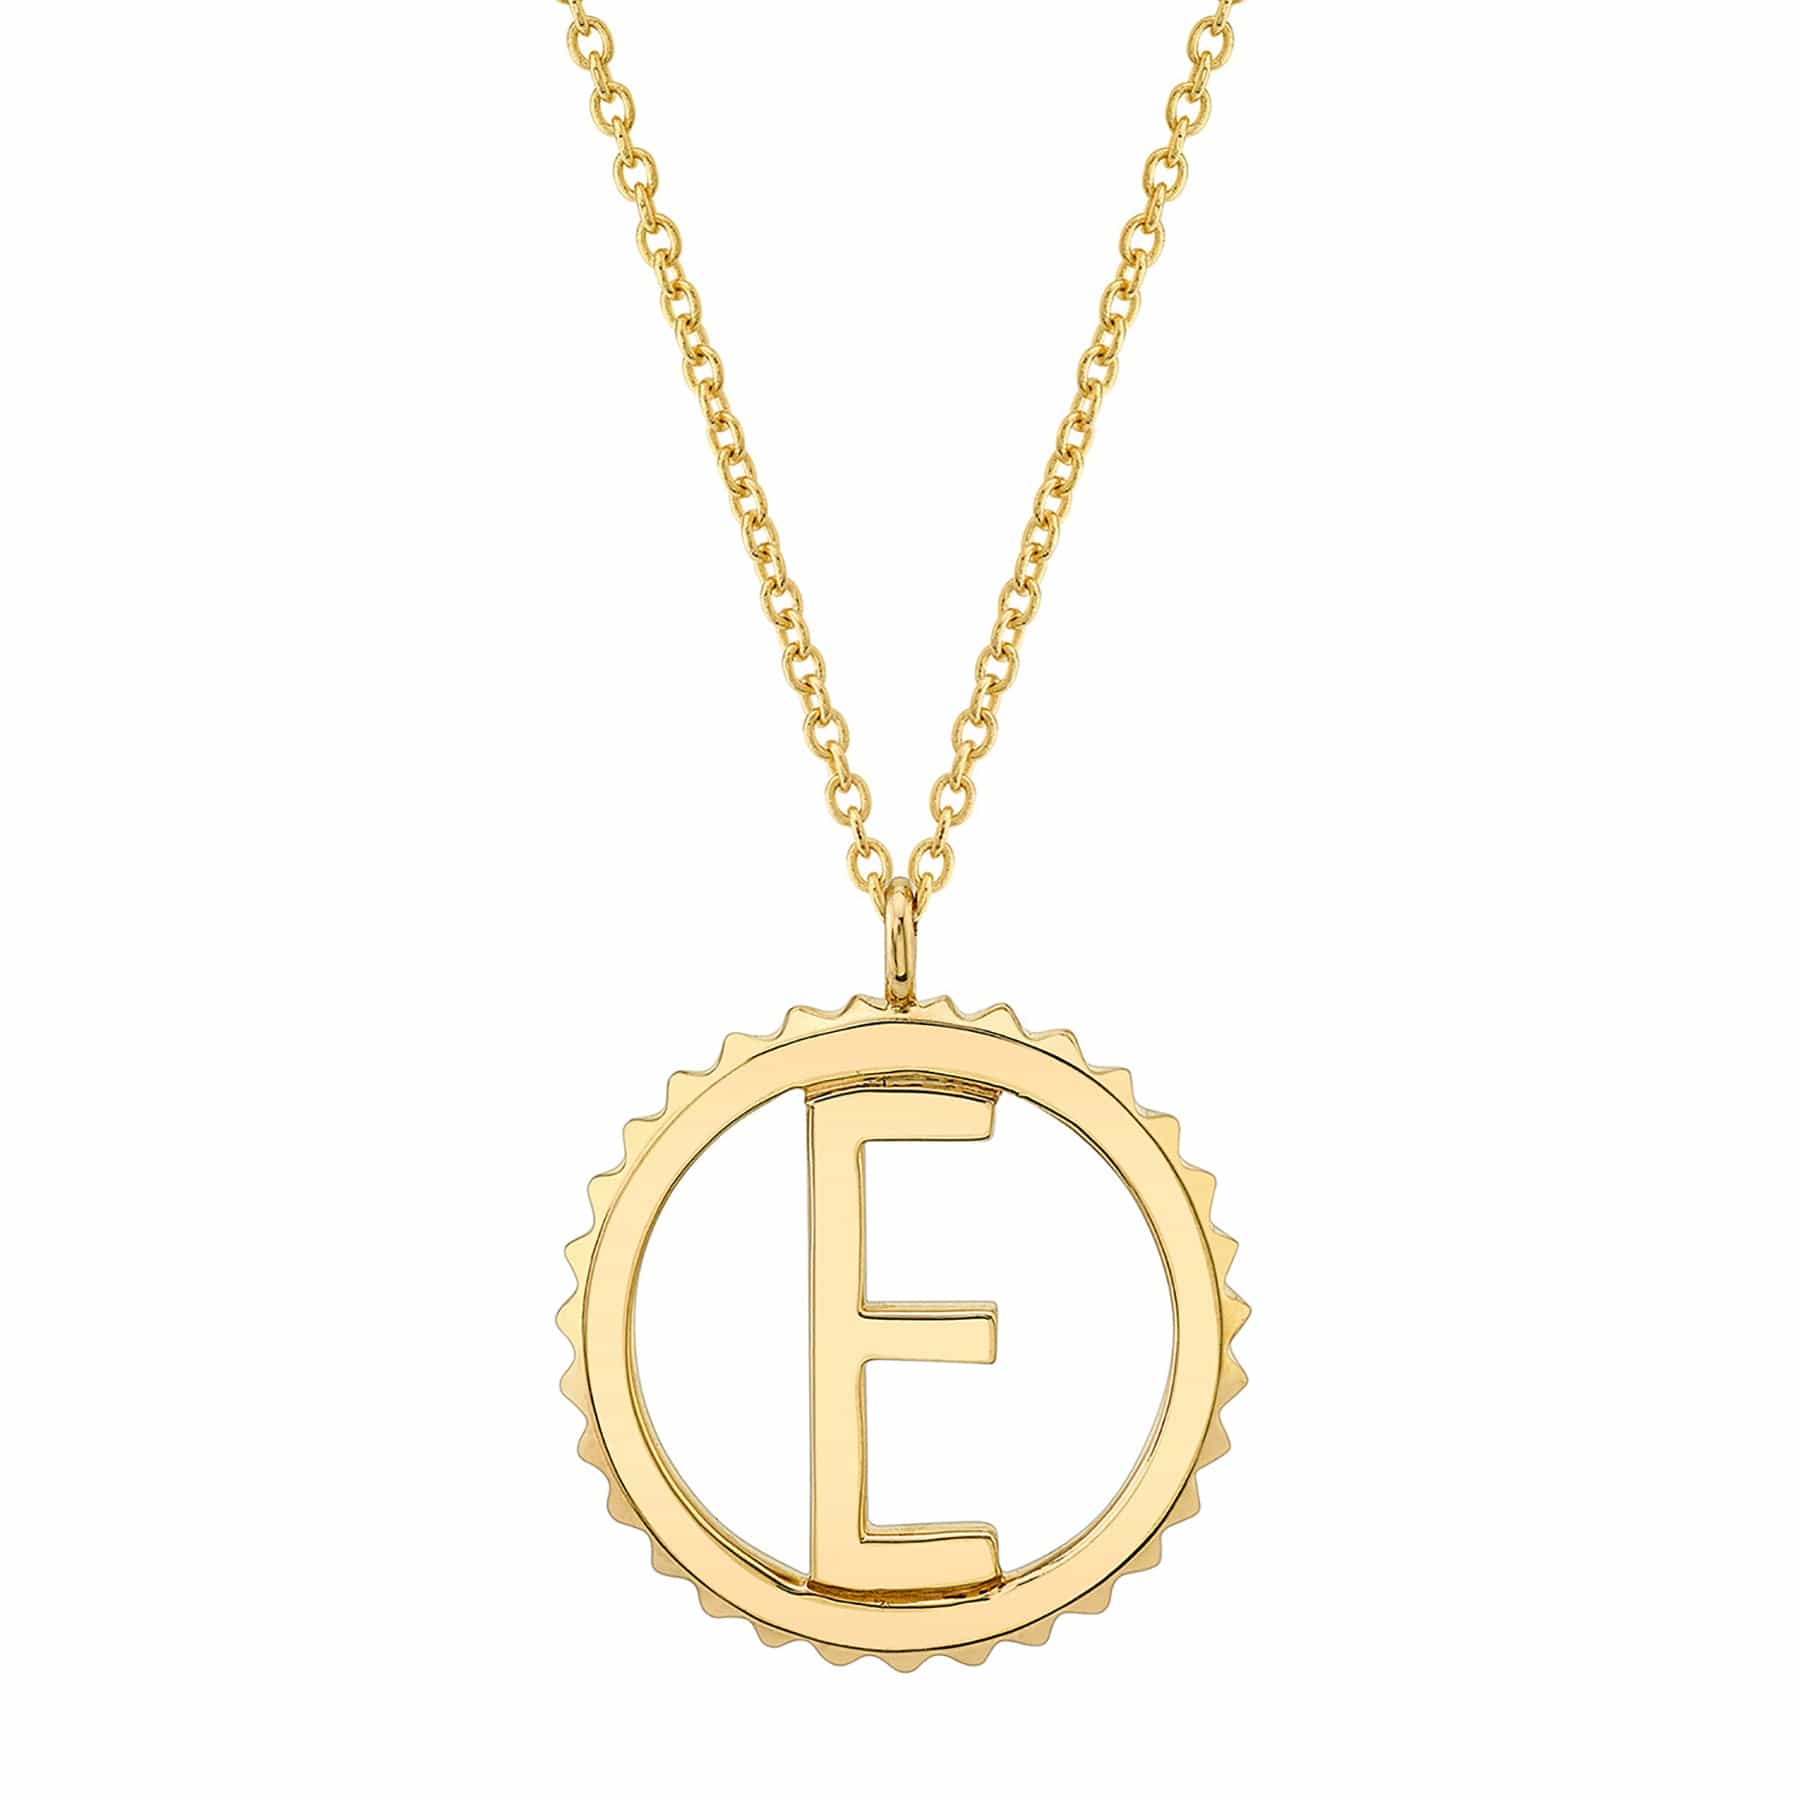 MICHAEL M Necklaces 14K Yellow Gold / B Tetra Initial Medallion P366YG